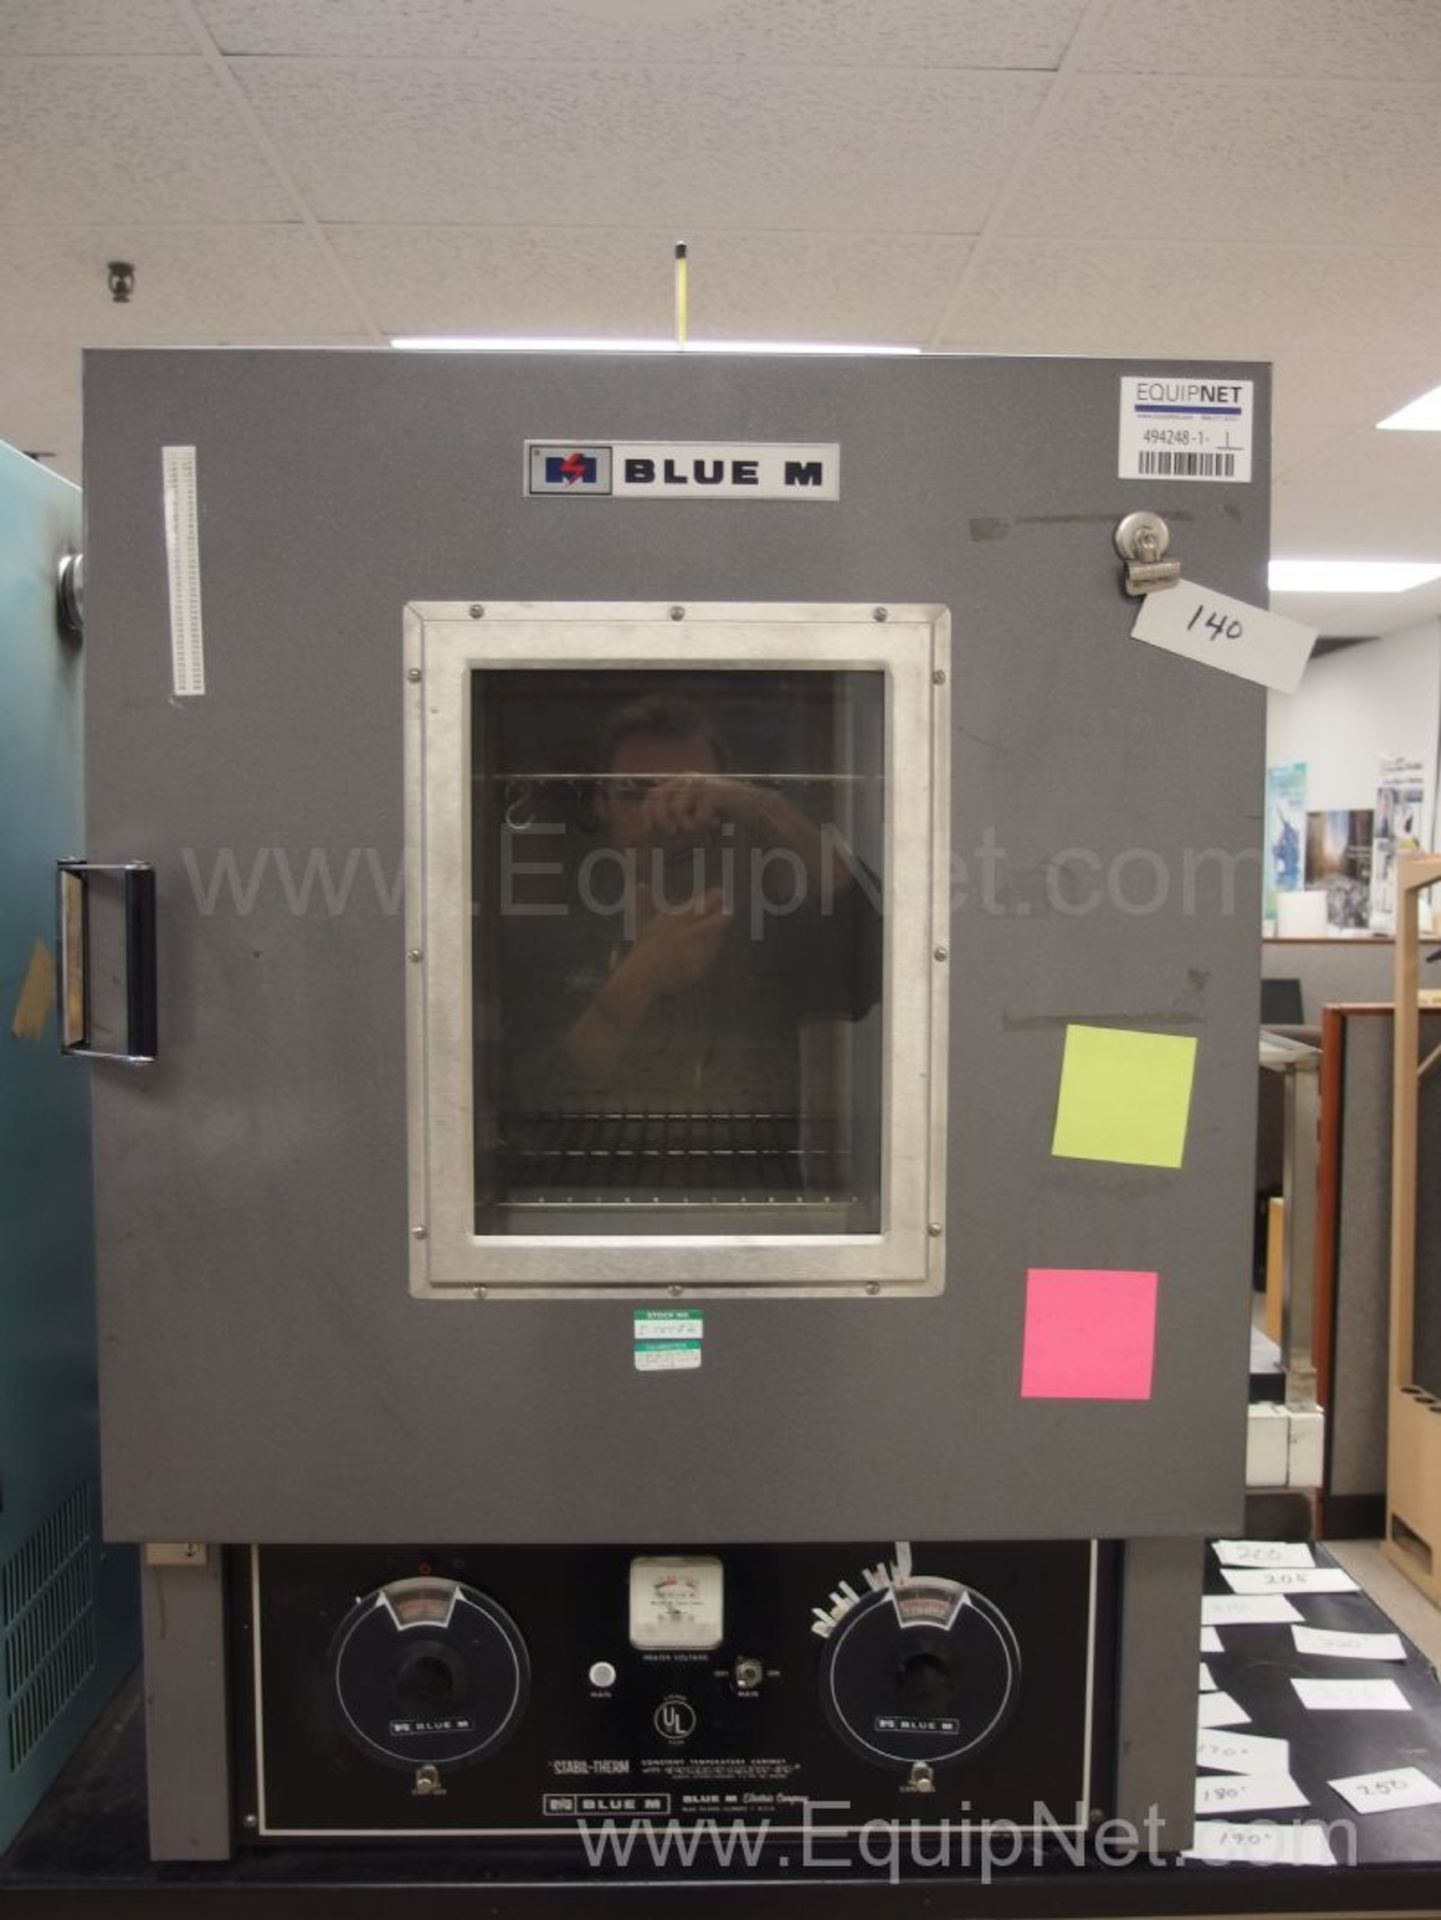 Blue M Stabli Therm Laboratory Oven - Image 2 of 2